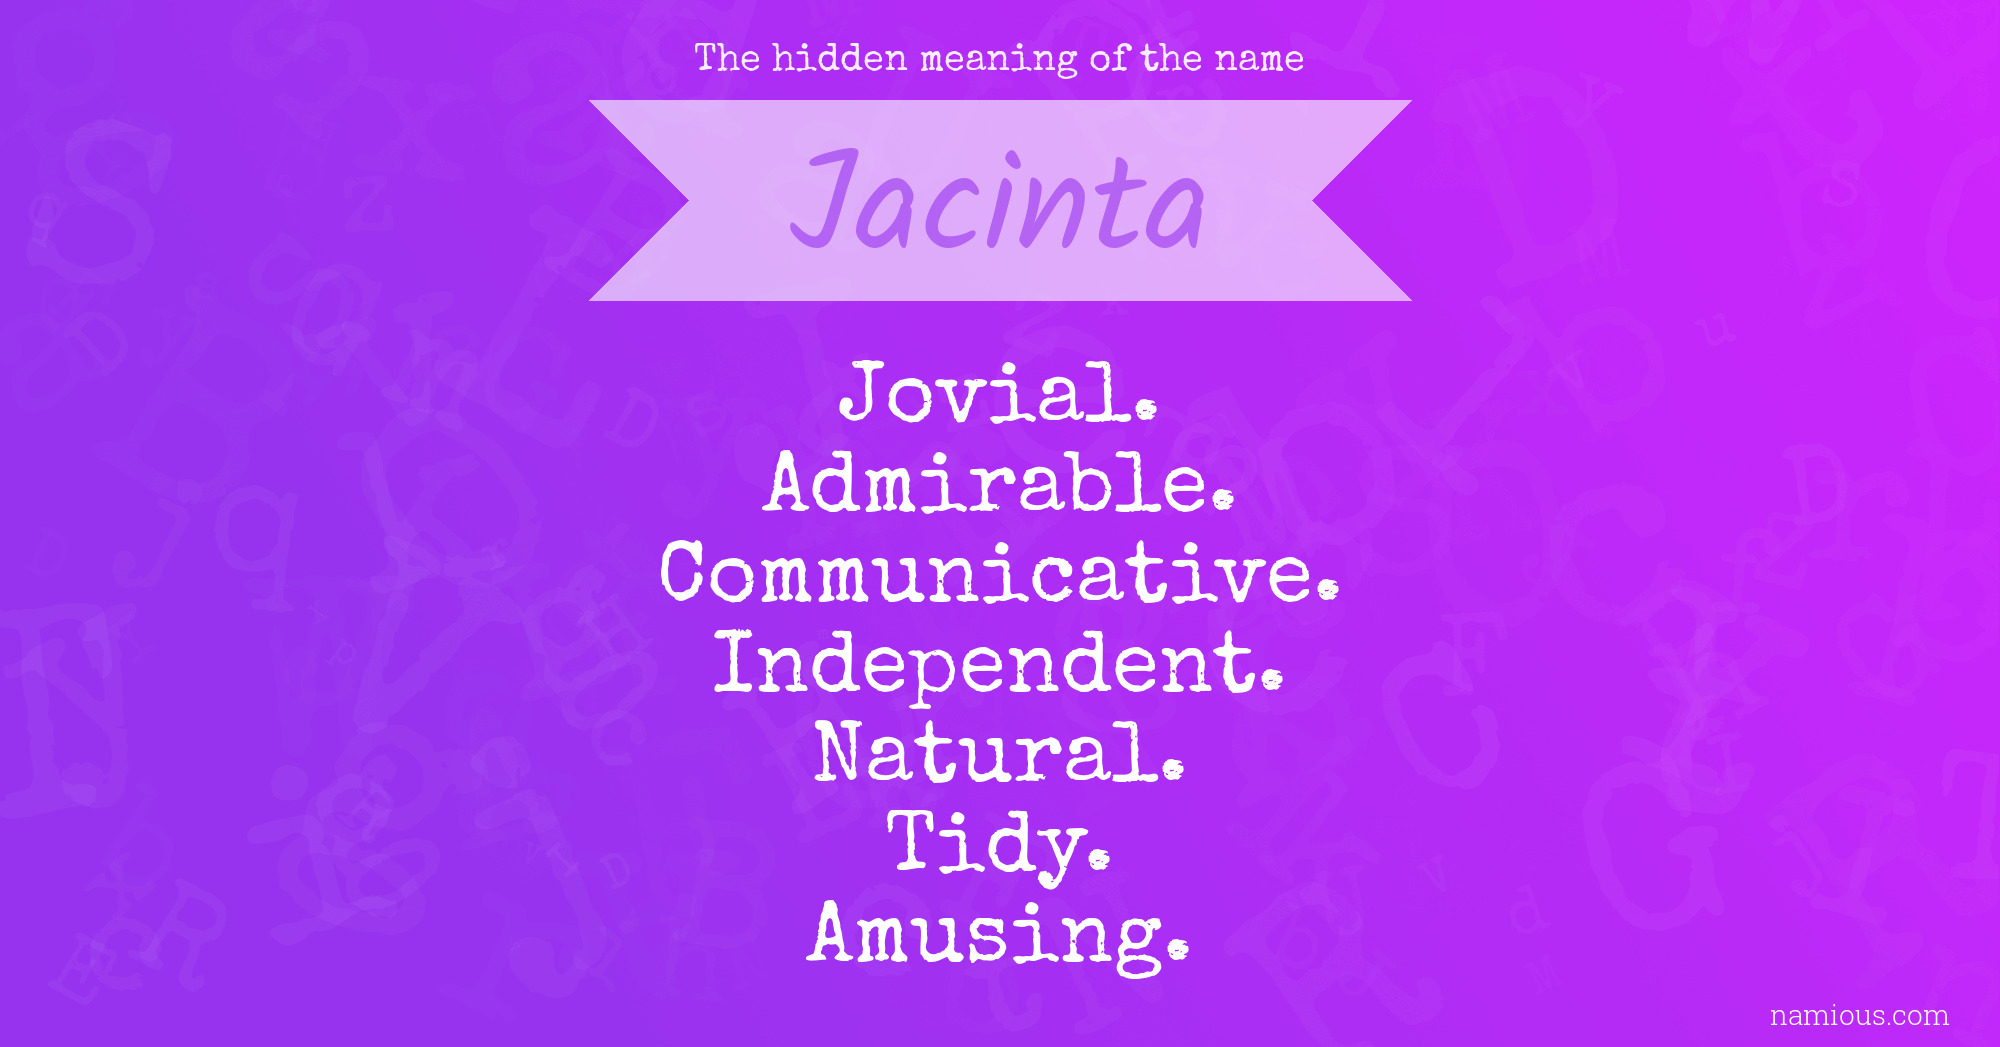 The hidden meaning of the name Jacinta